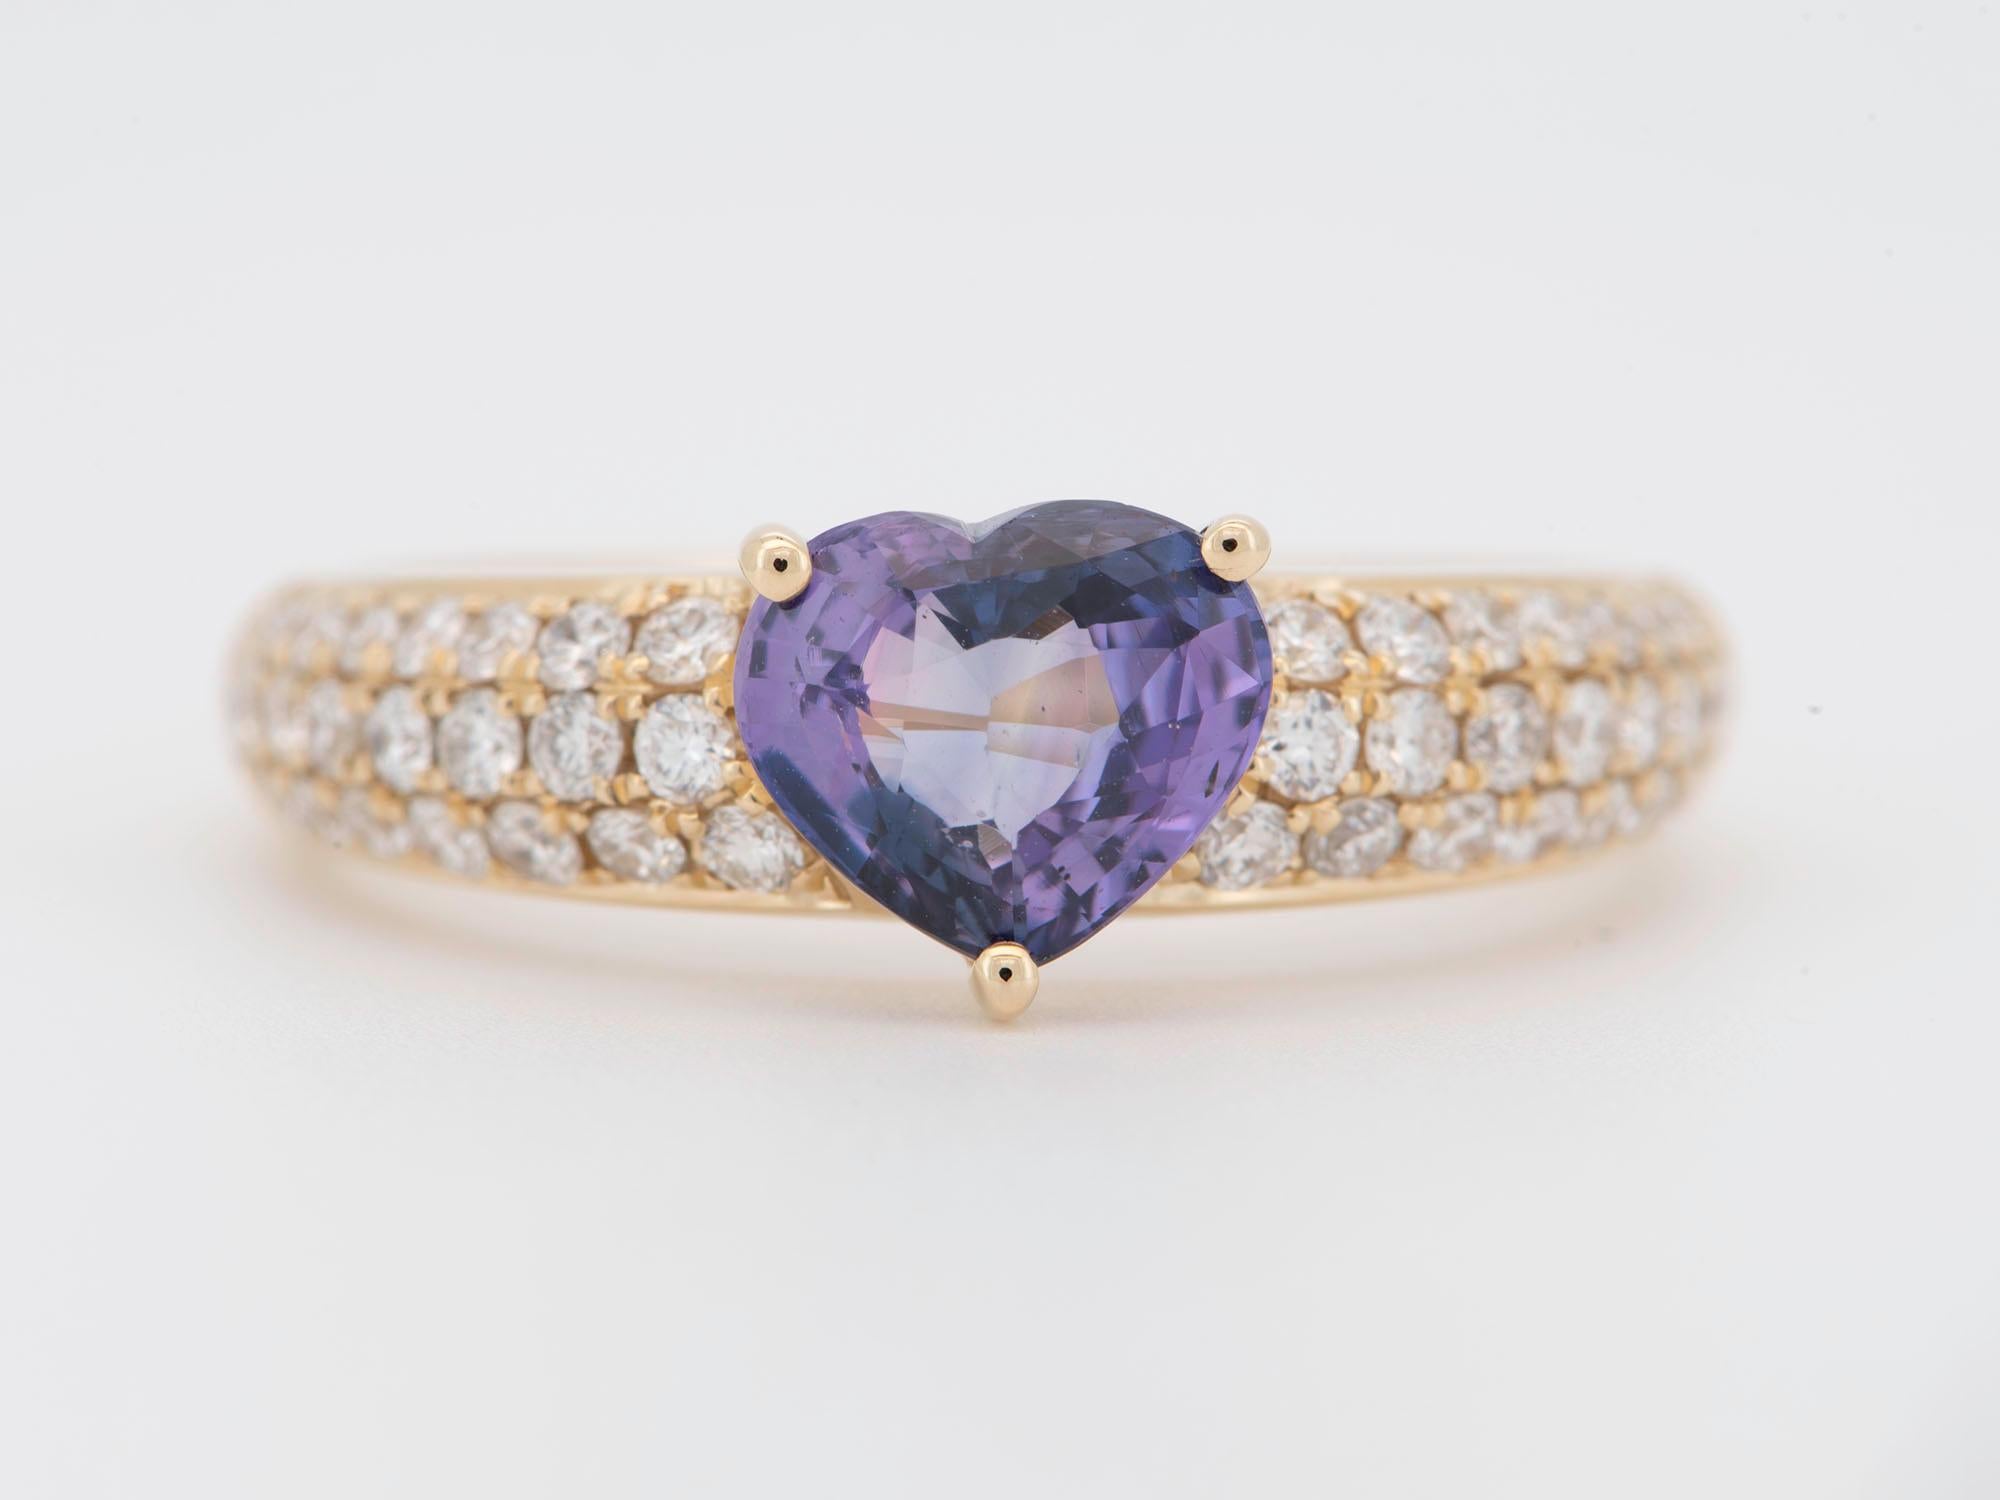 ♥ This ring features a gorgeous bi-color heart-shaped sapphire, set in a sea of diamond pave. Classic design with a unique twist!
♥ The setting measures 6.7mm in length (North South direction), 7.2mm in width (East West direction), and stands 5.1mm